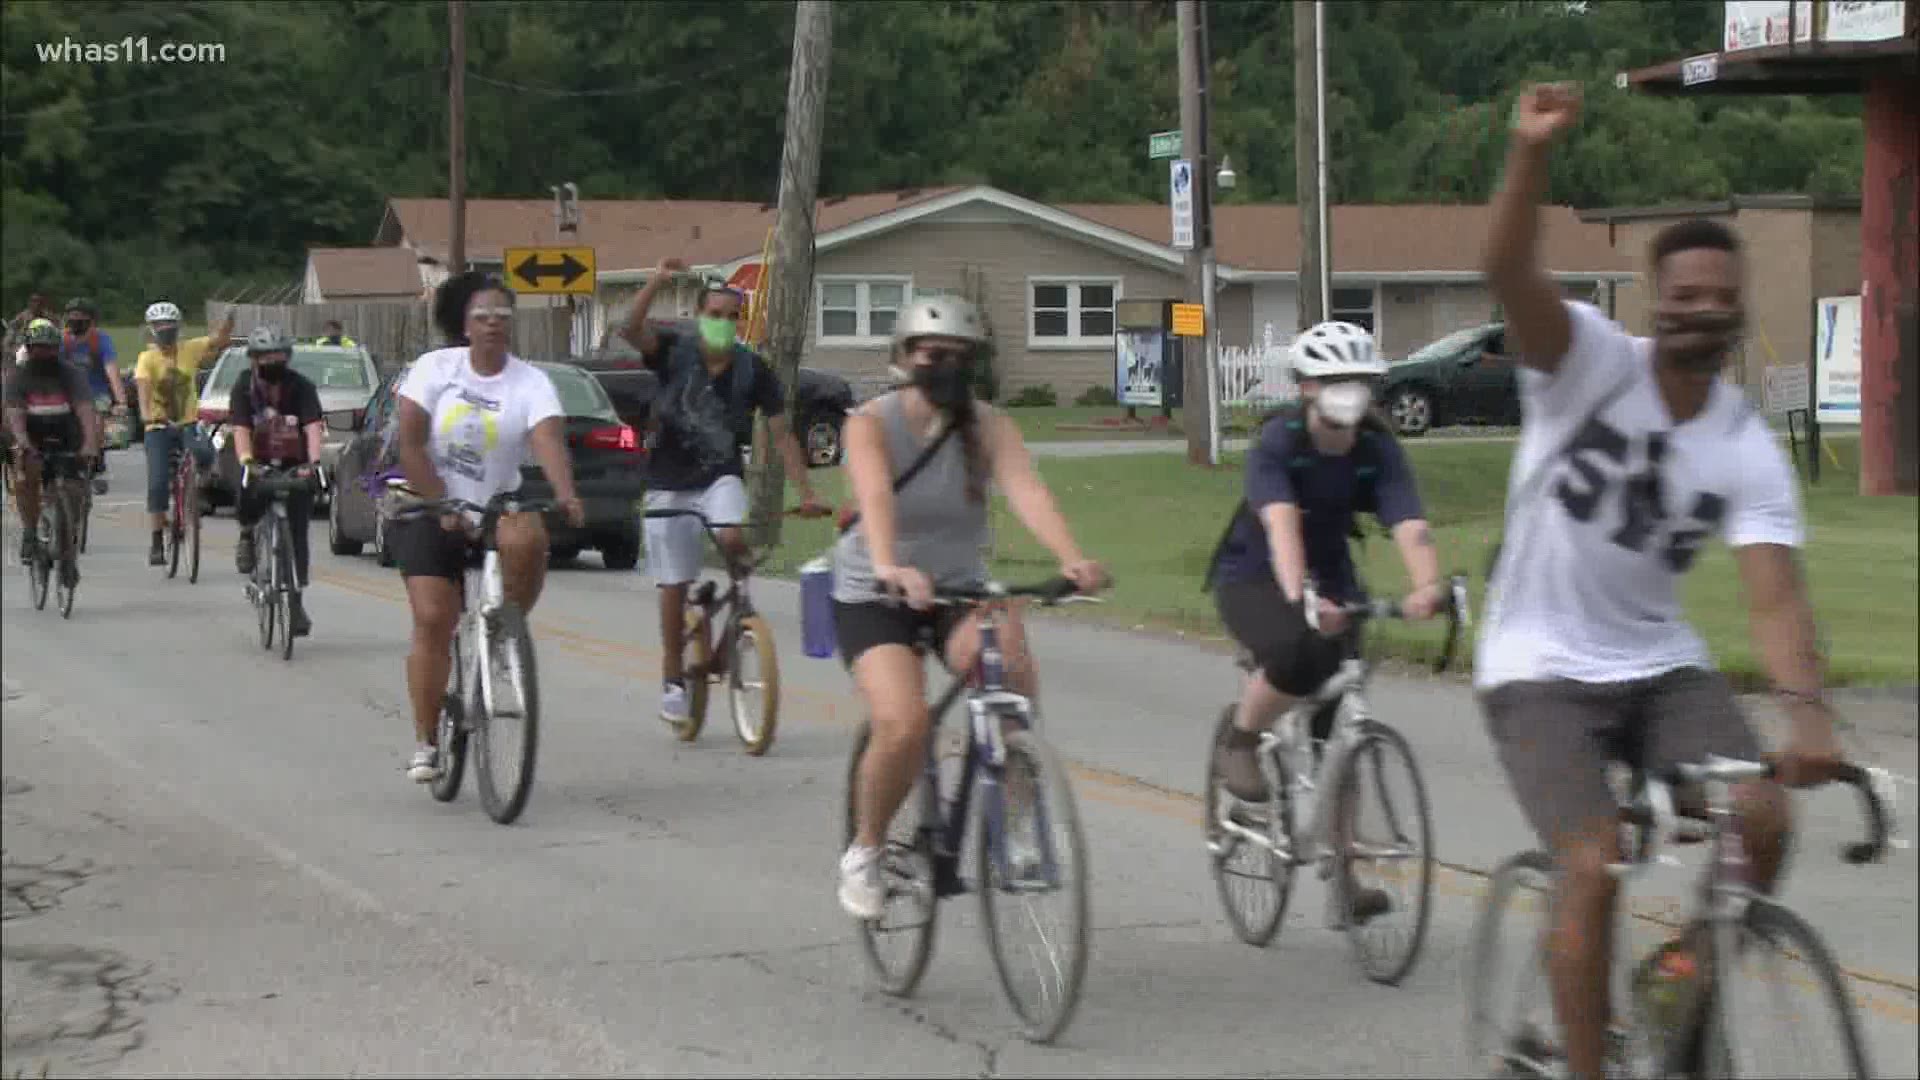 Six months after Breonna Taylor was shot by Louisville police, community members organized a 24-mile bike ride to her south Louisville apartment.